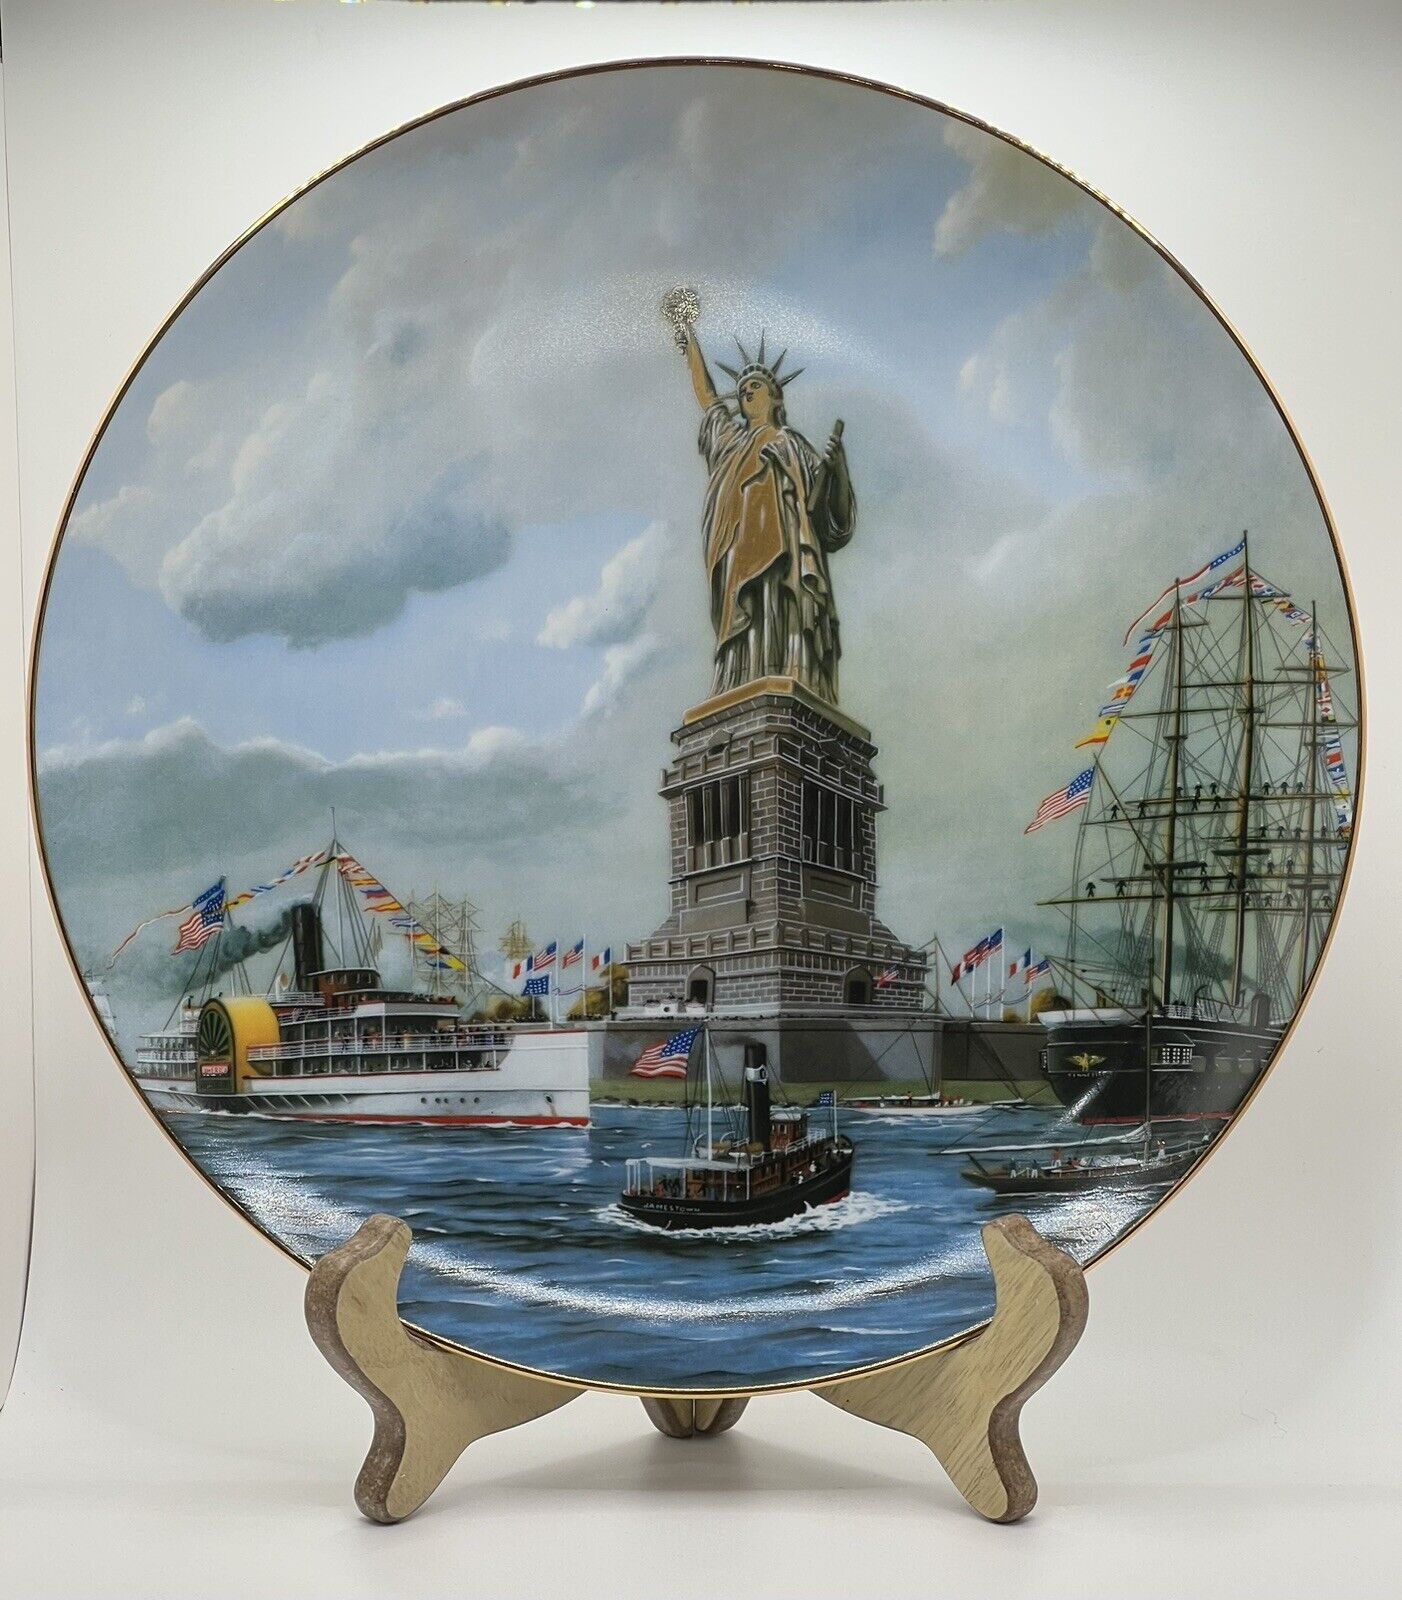 Statue Of Liberty “The Dedication” 1985 Armstrong’s Art On Porcelain￼ No. Plate